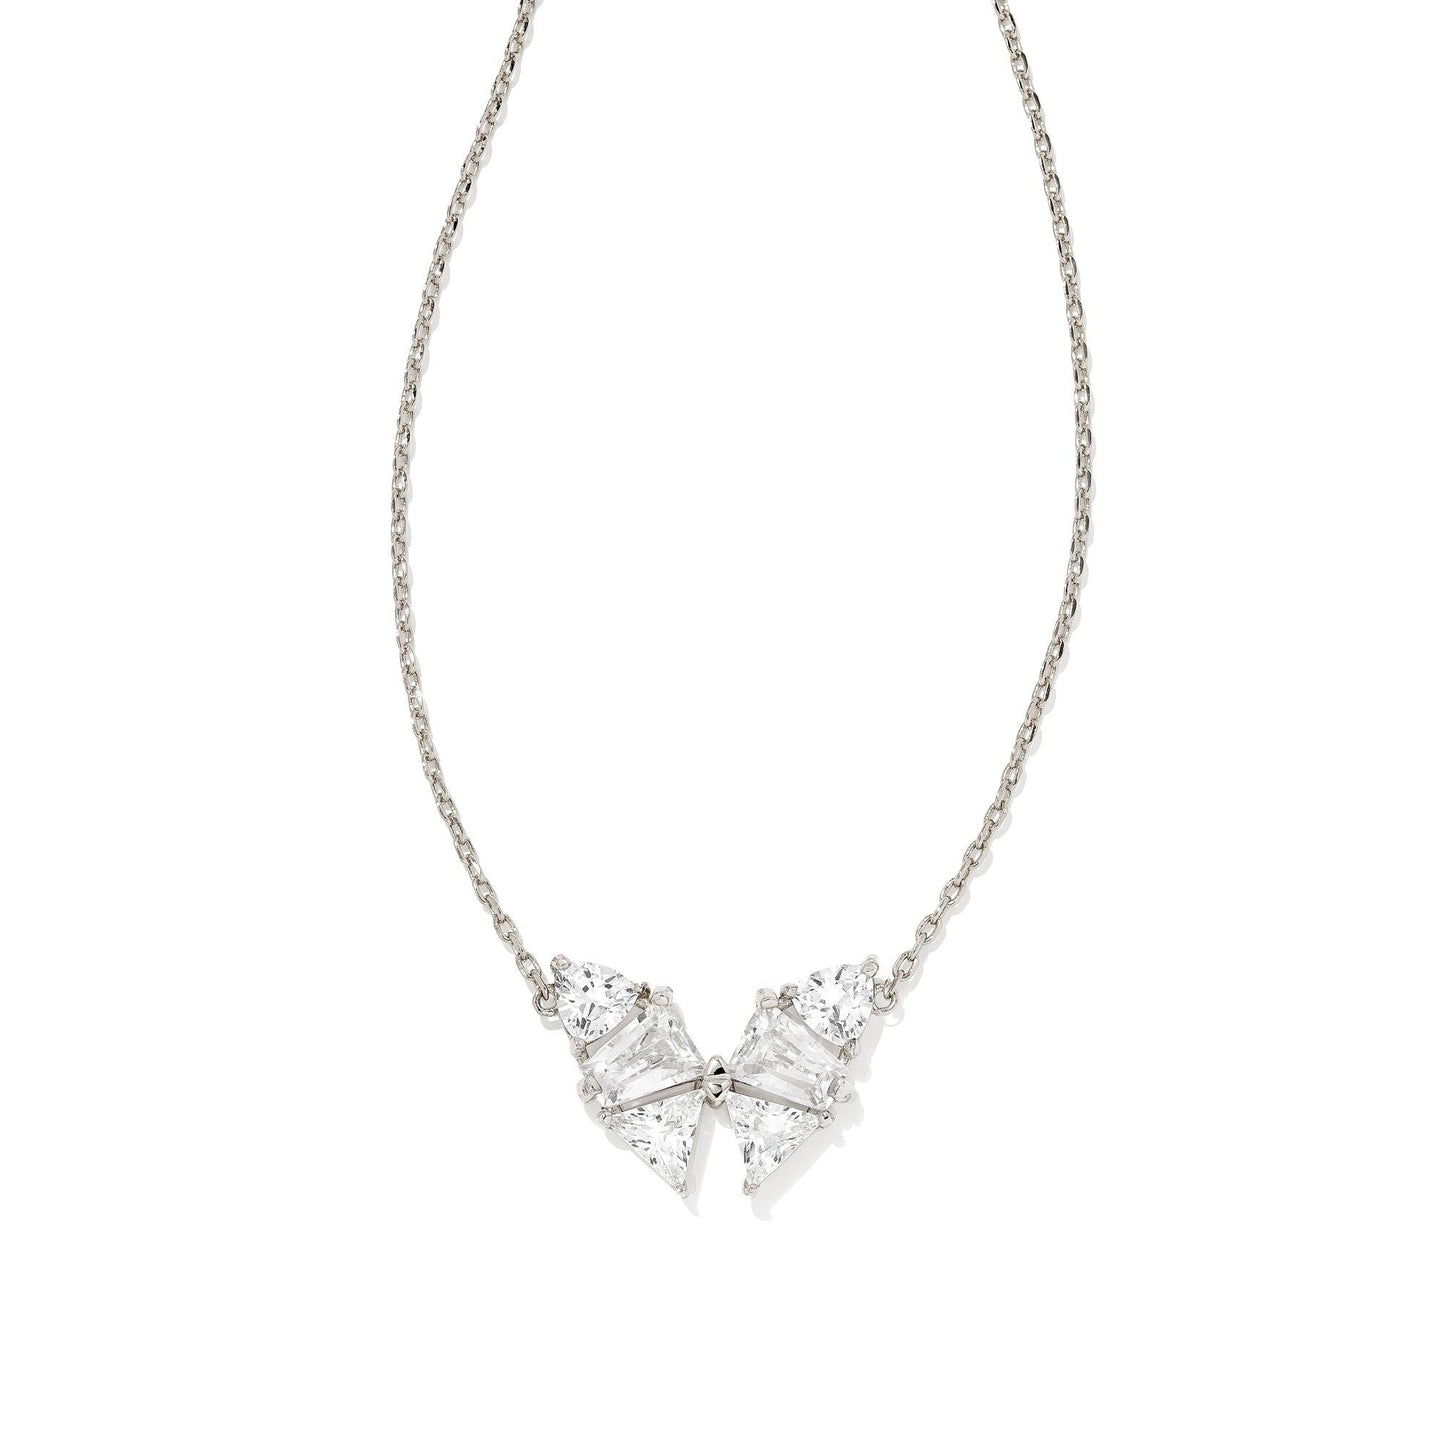 Blair Butterfly Pendant Necklace in Rhodium and White Crystal